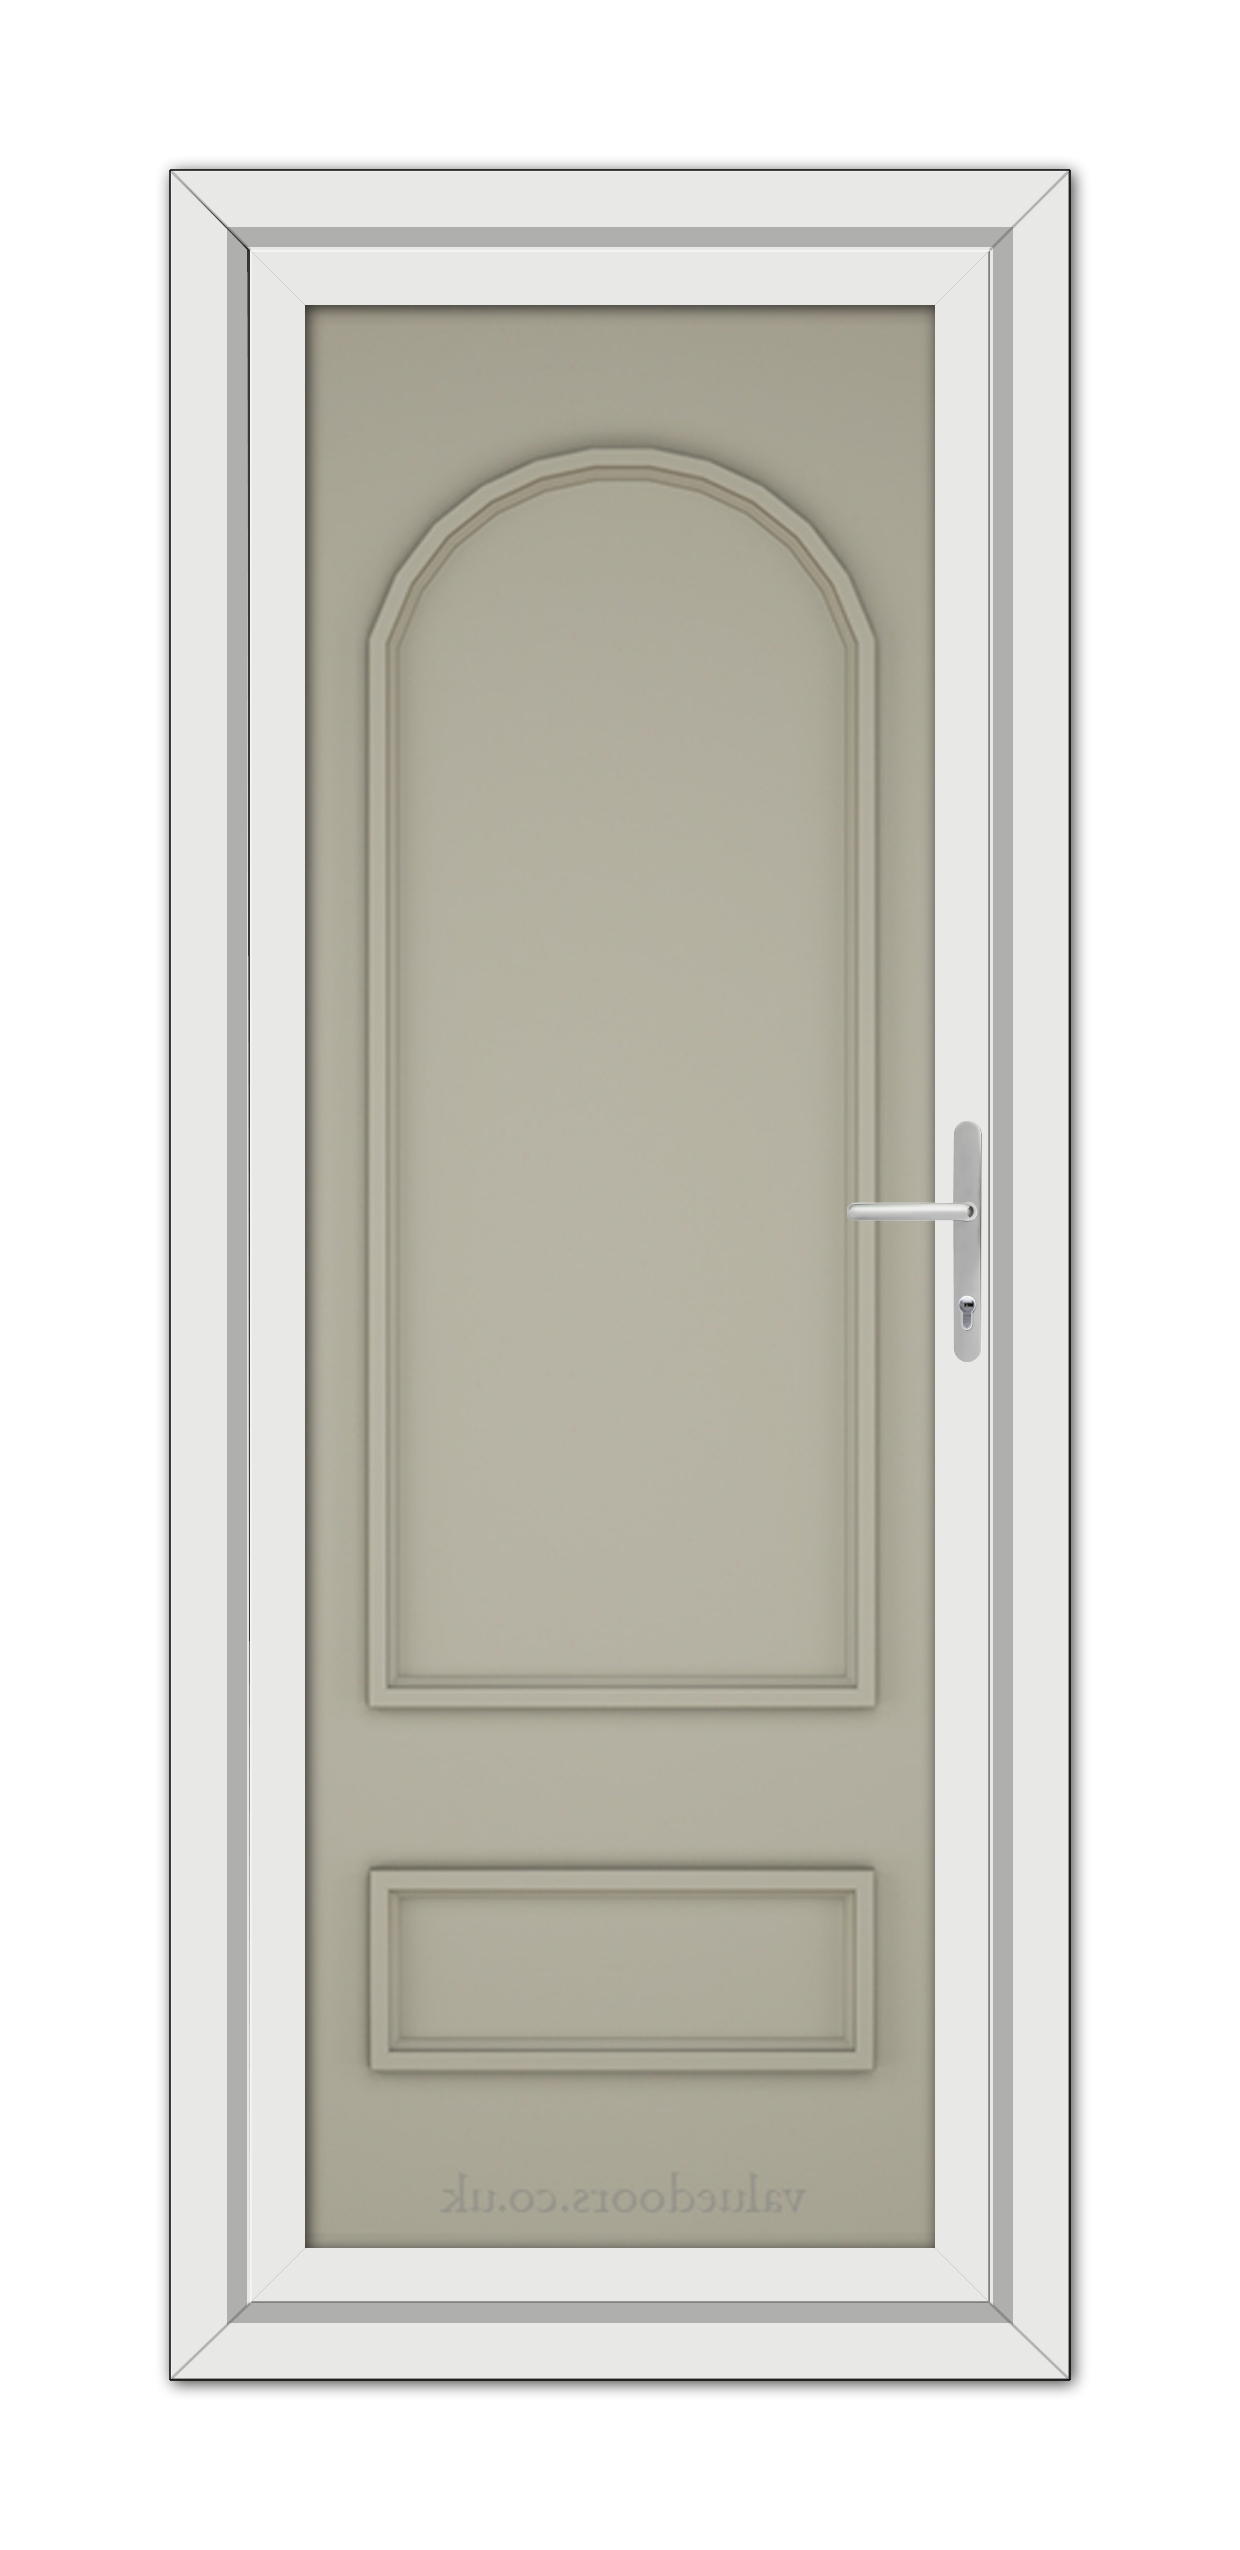 A vertical image of a closed, Pebble Grey Canterbury Solid uPVC Door with a white frame and a metal handle, viewed from the front.